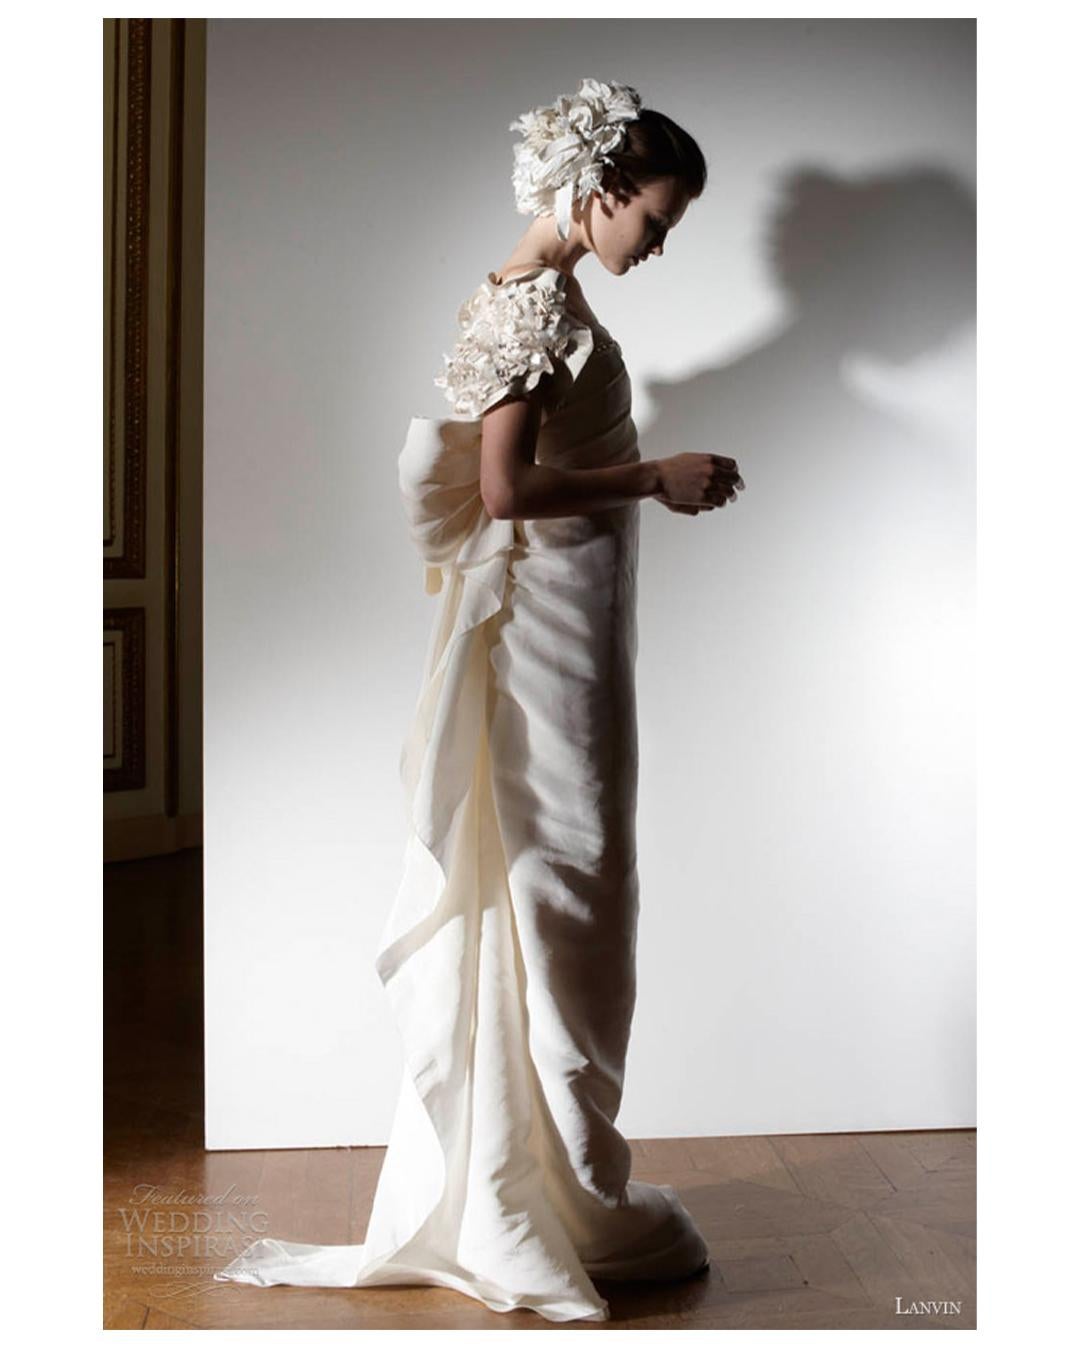 LOVE LALI Vintage

This is a truly beautiful gown from Lanvin's 2013 Blanche collection by Alber Elbaz. Though it is a wedding gown, this could also quite easily be worn as an evening dress. 
The colour is a gorgeous creamy ivory and is made from